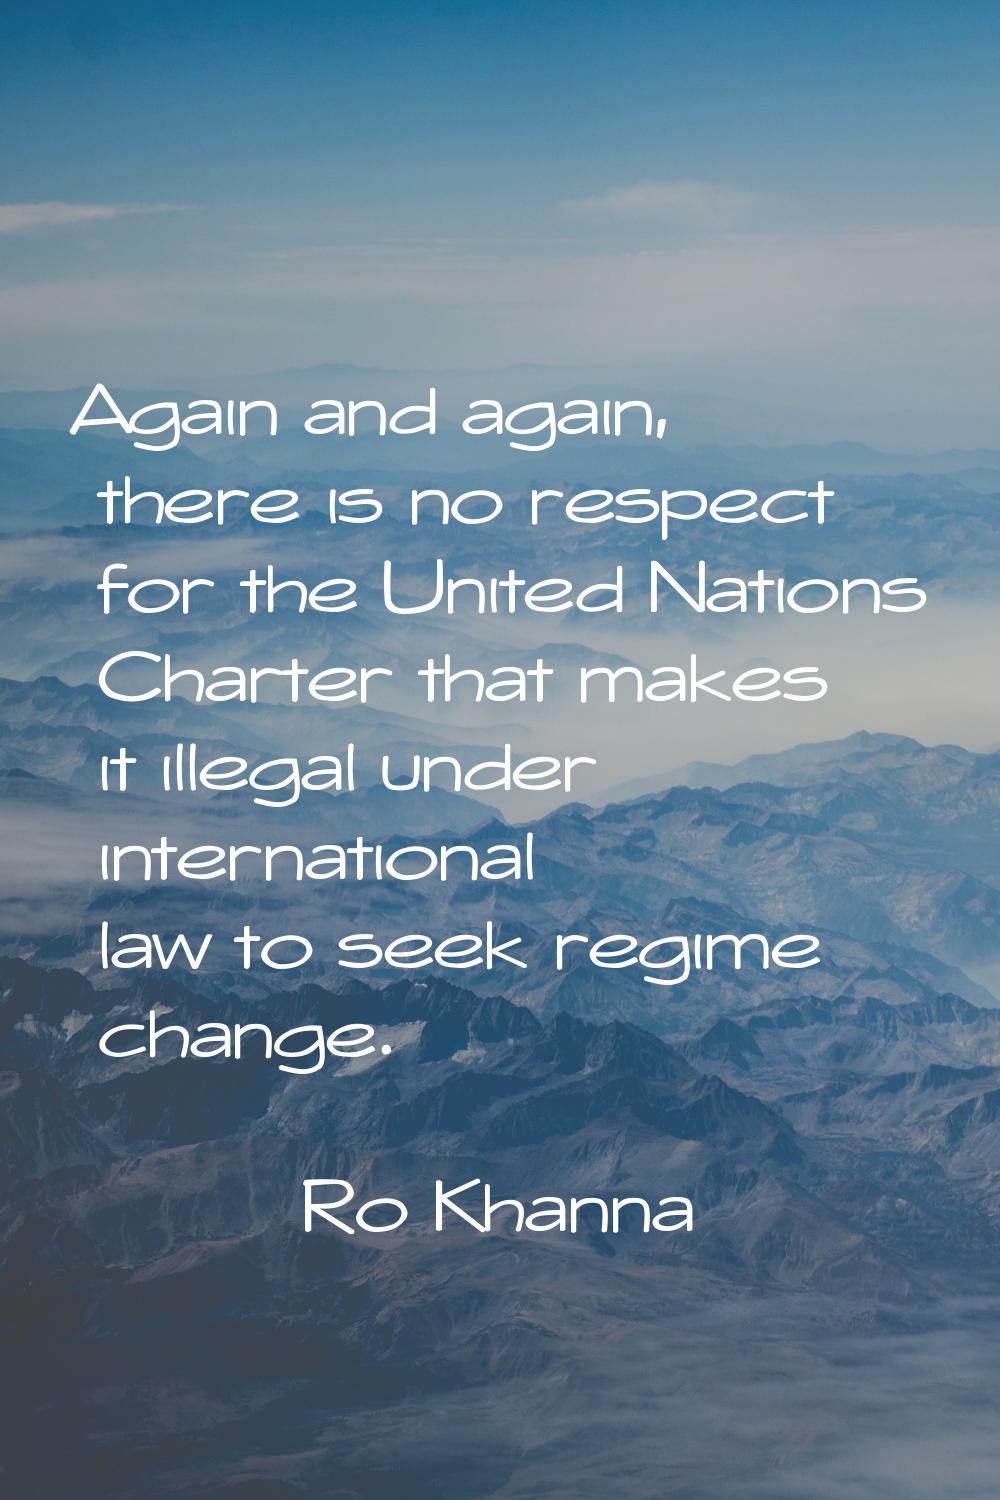 Again and again, there is no respect for the United Nations Charter that makes it illegal under int